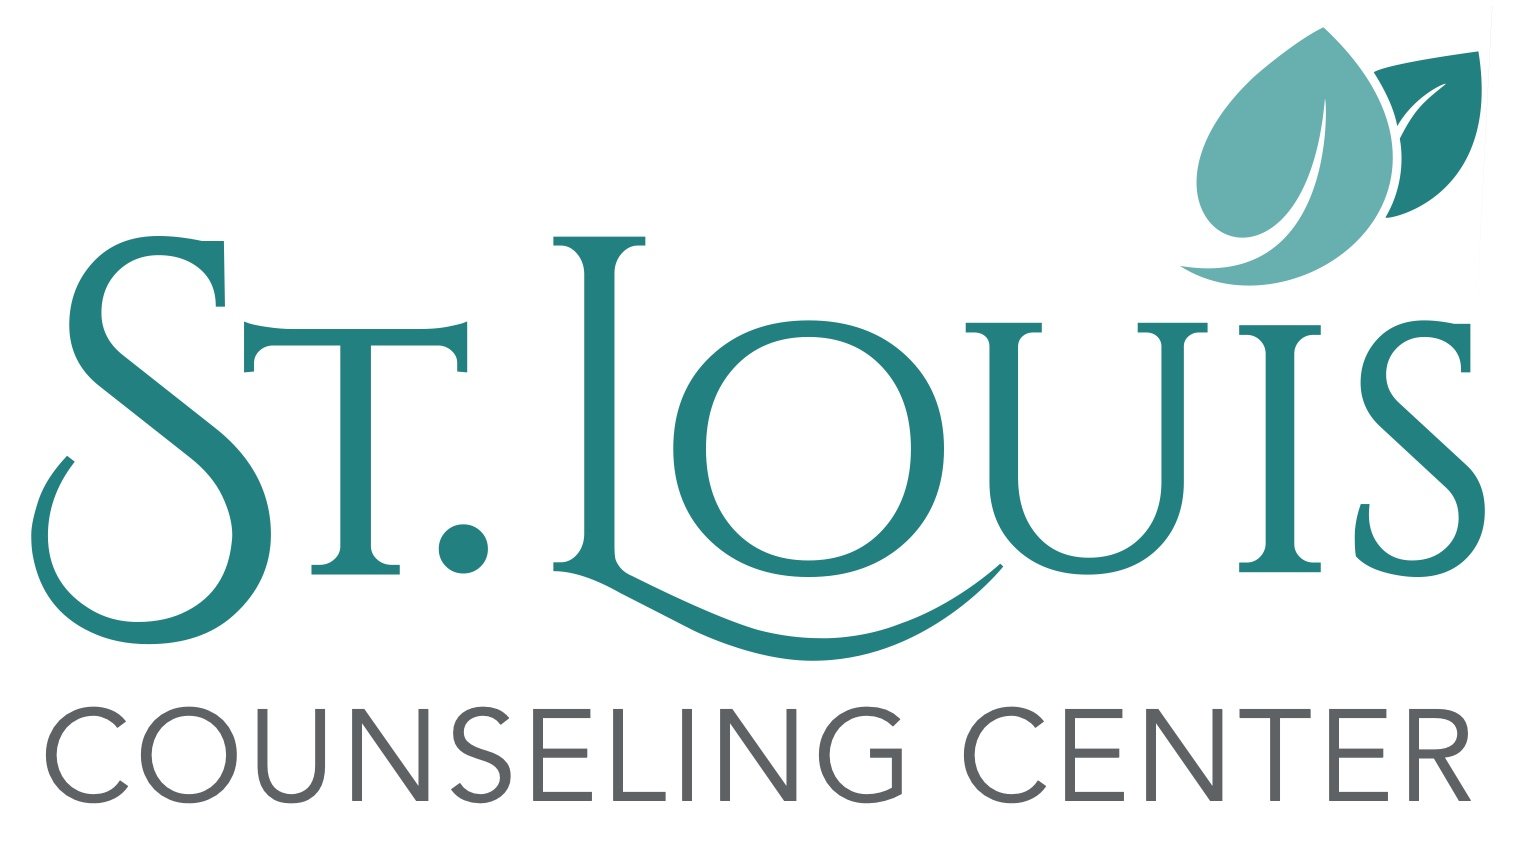 St Louis Counseling Center